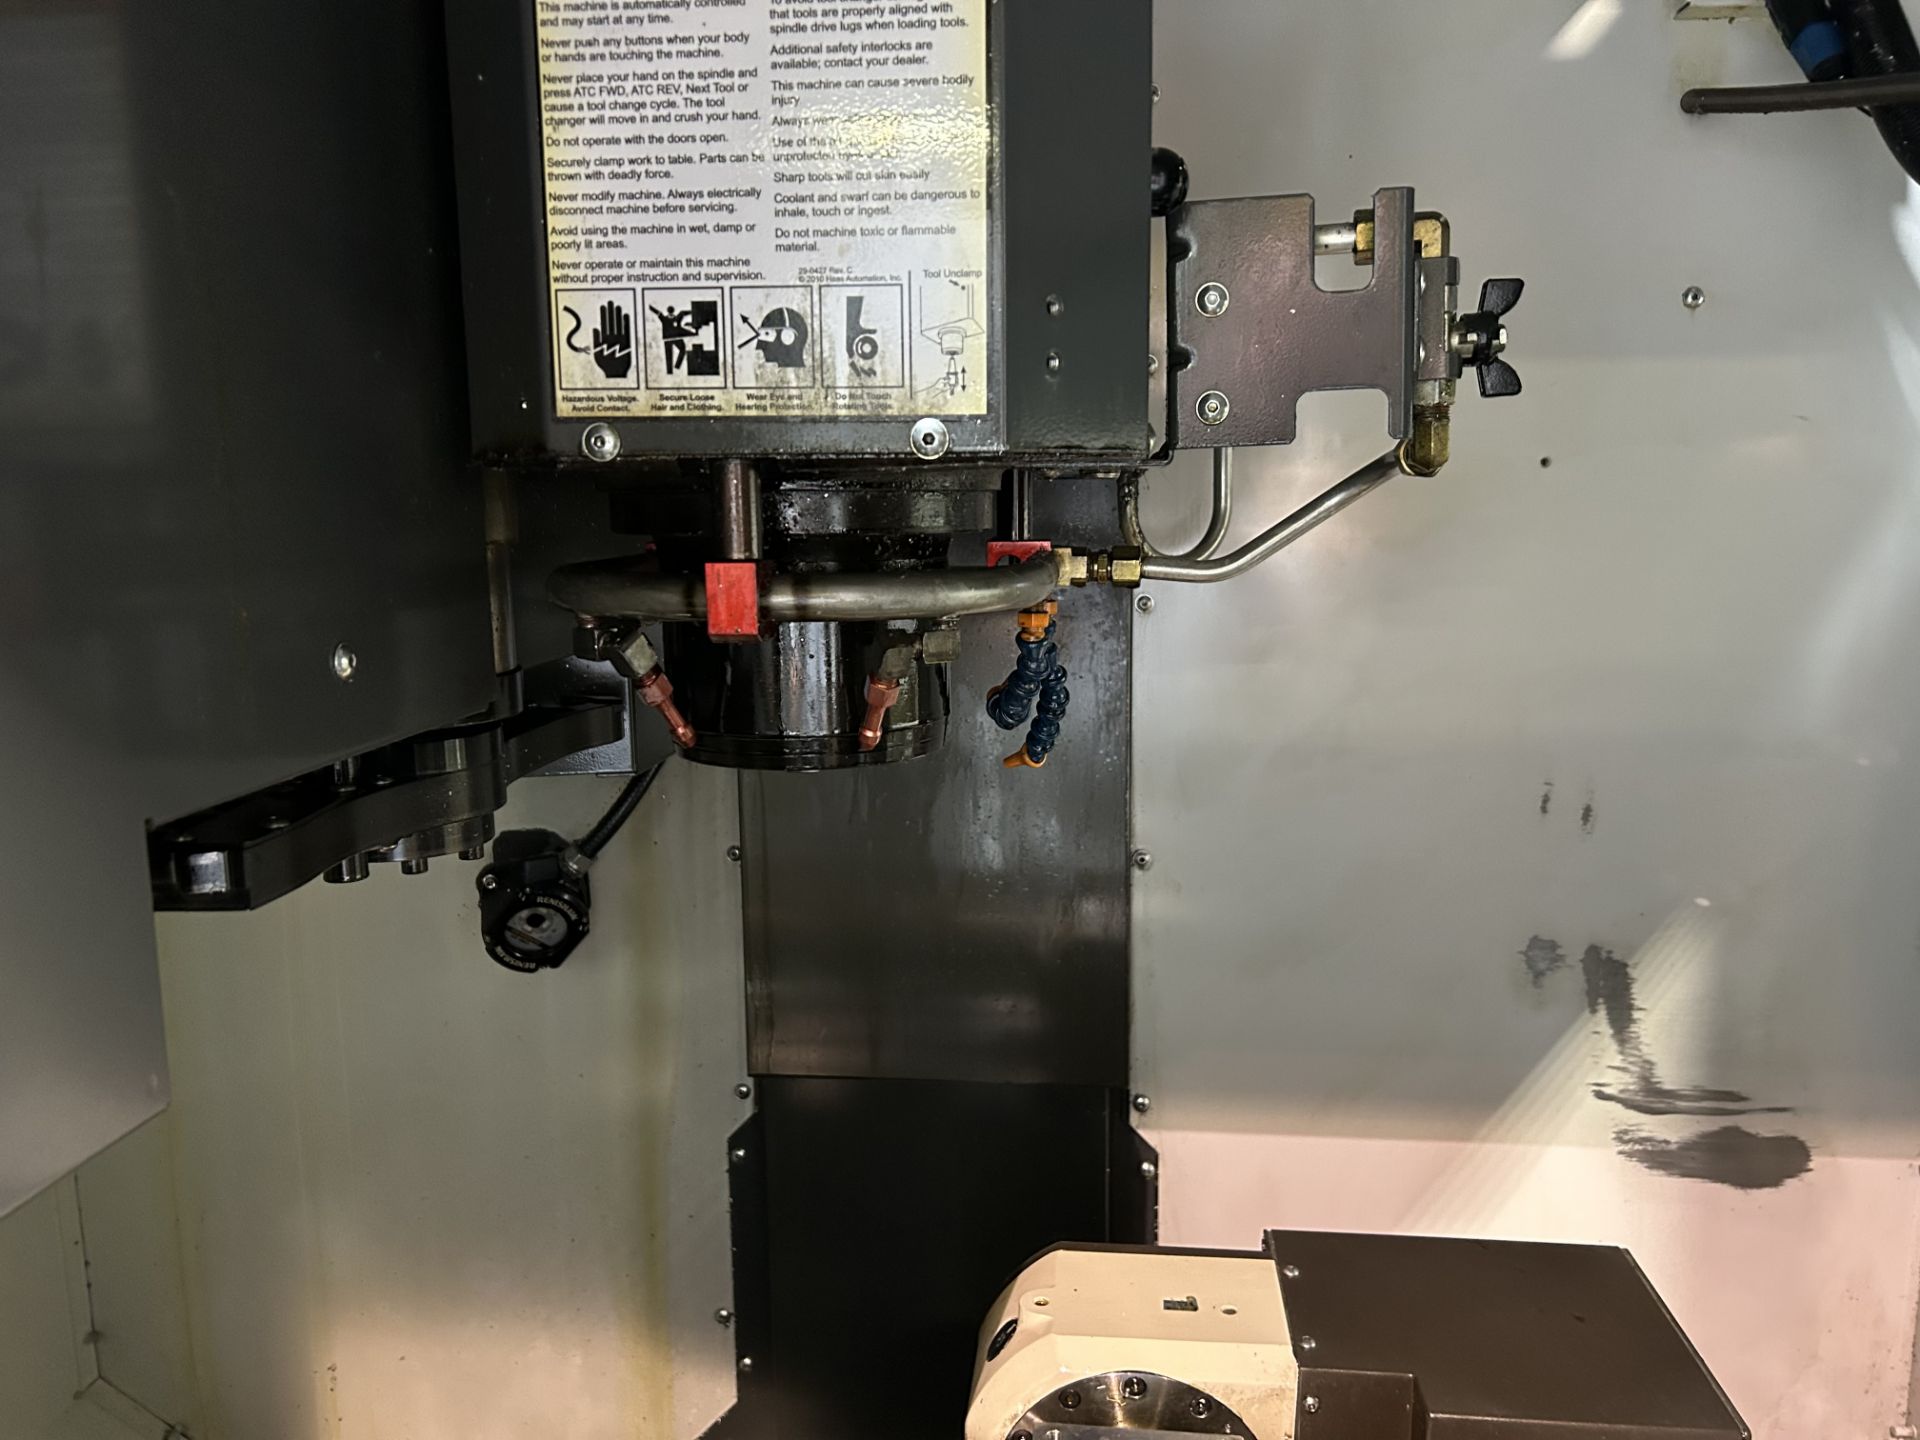 Haas DT-1 5-Axis CNC Drilling & Tapping Machine, S/N 1123539, 2015 - Image 2 of 7